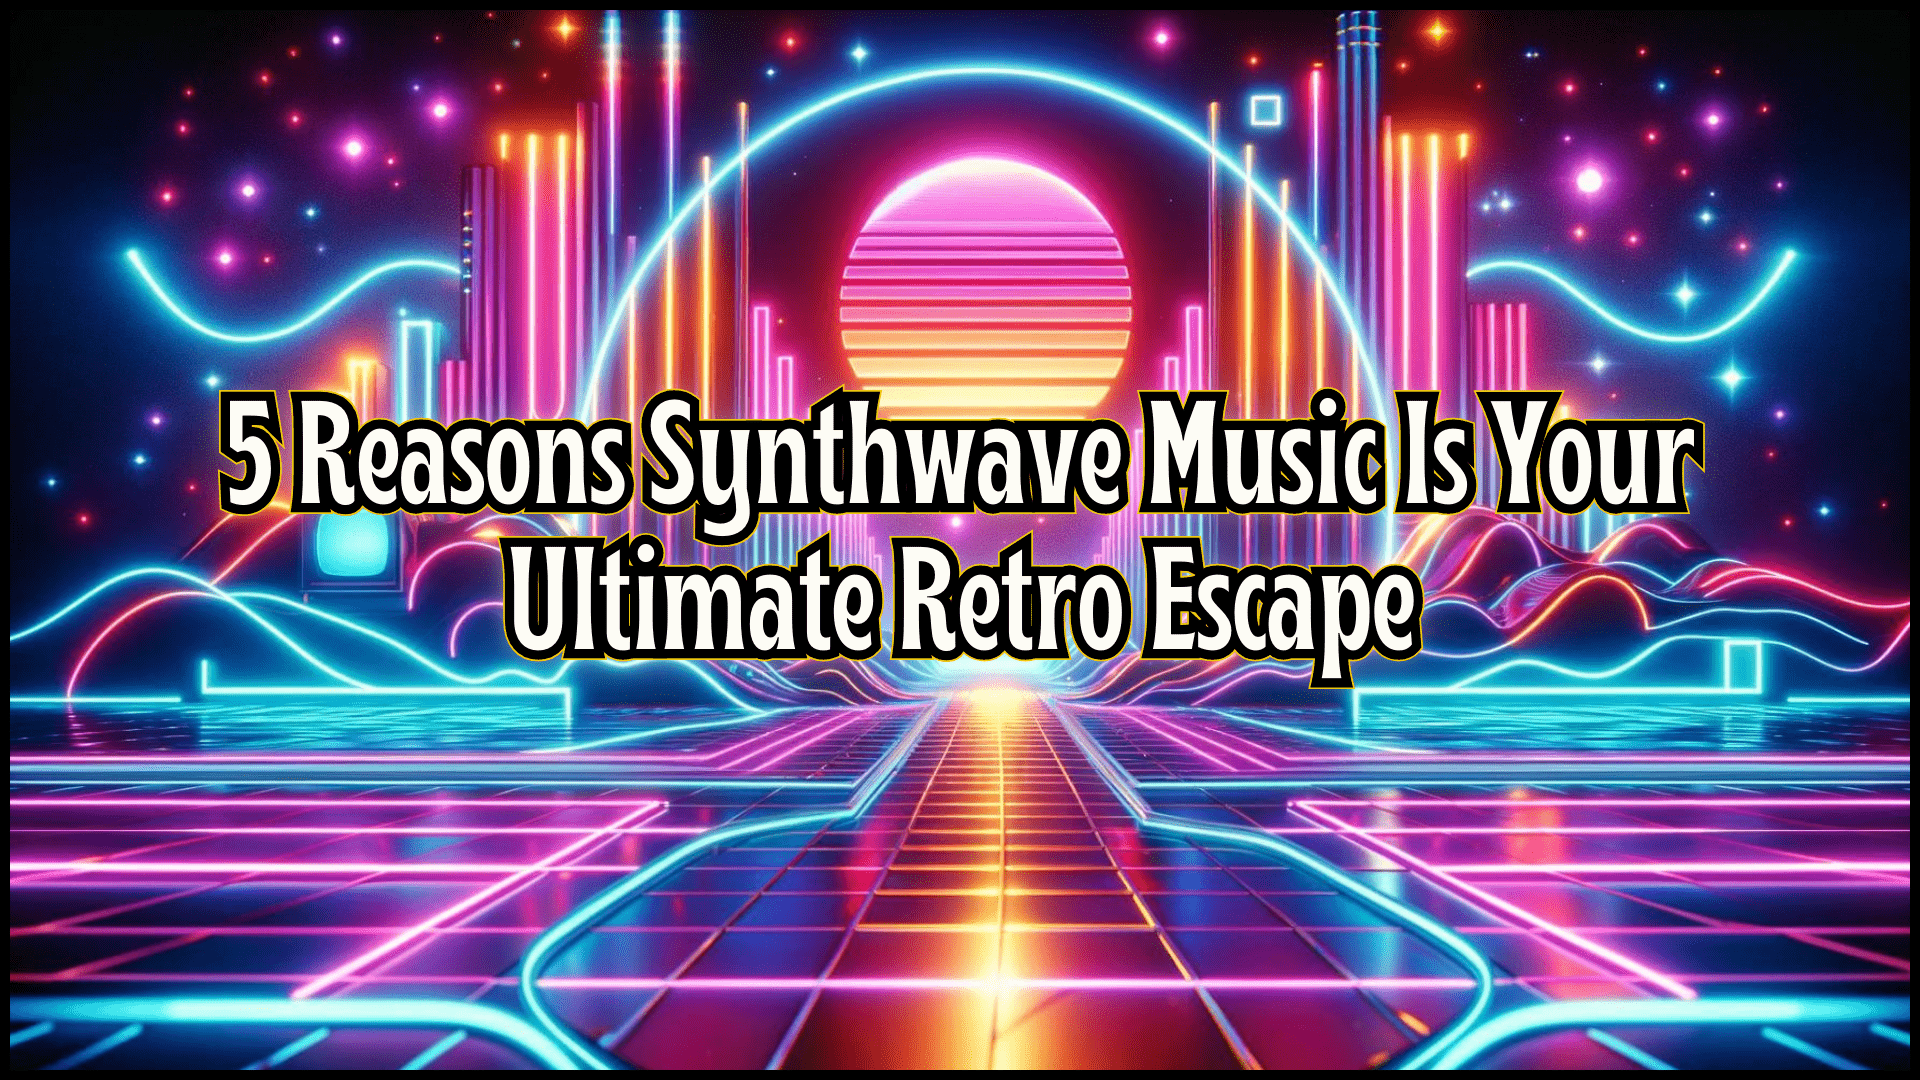 5 Reasons Synthwave Music Is Your Ultimate Retro Escape